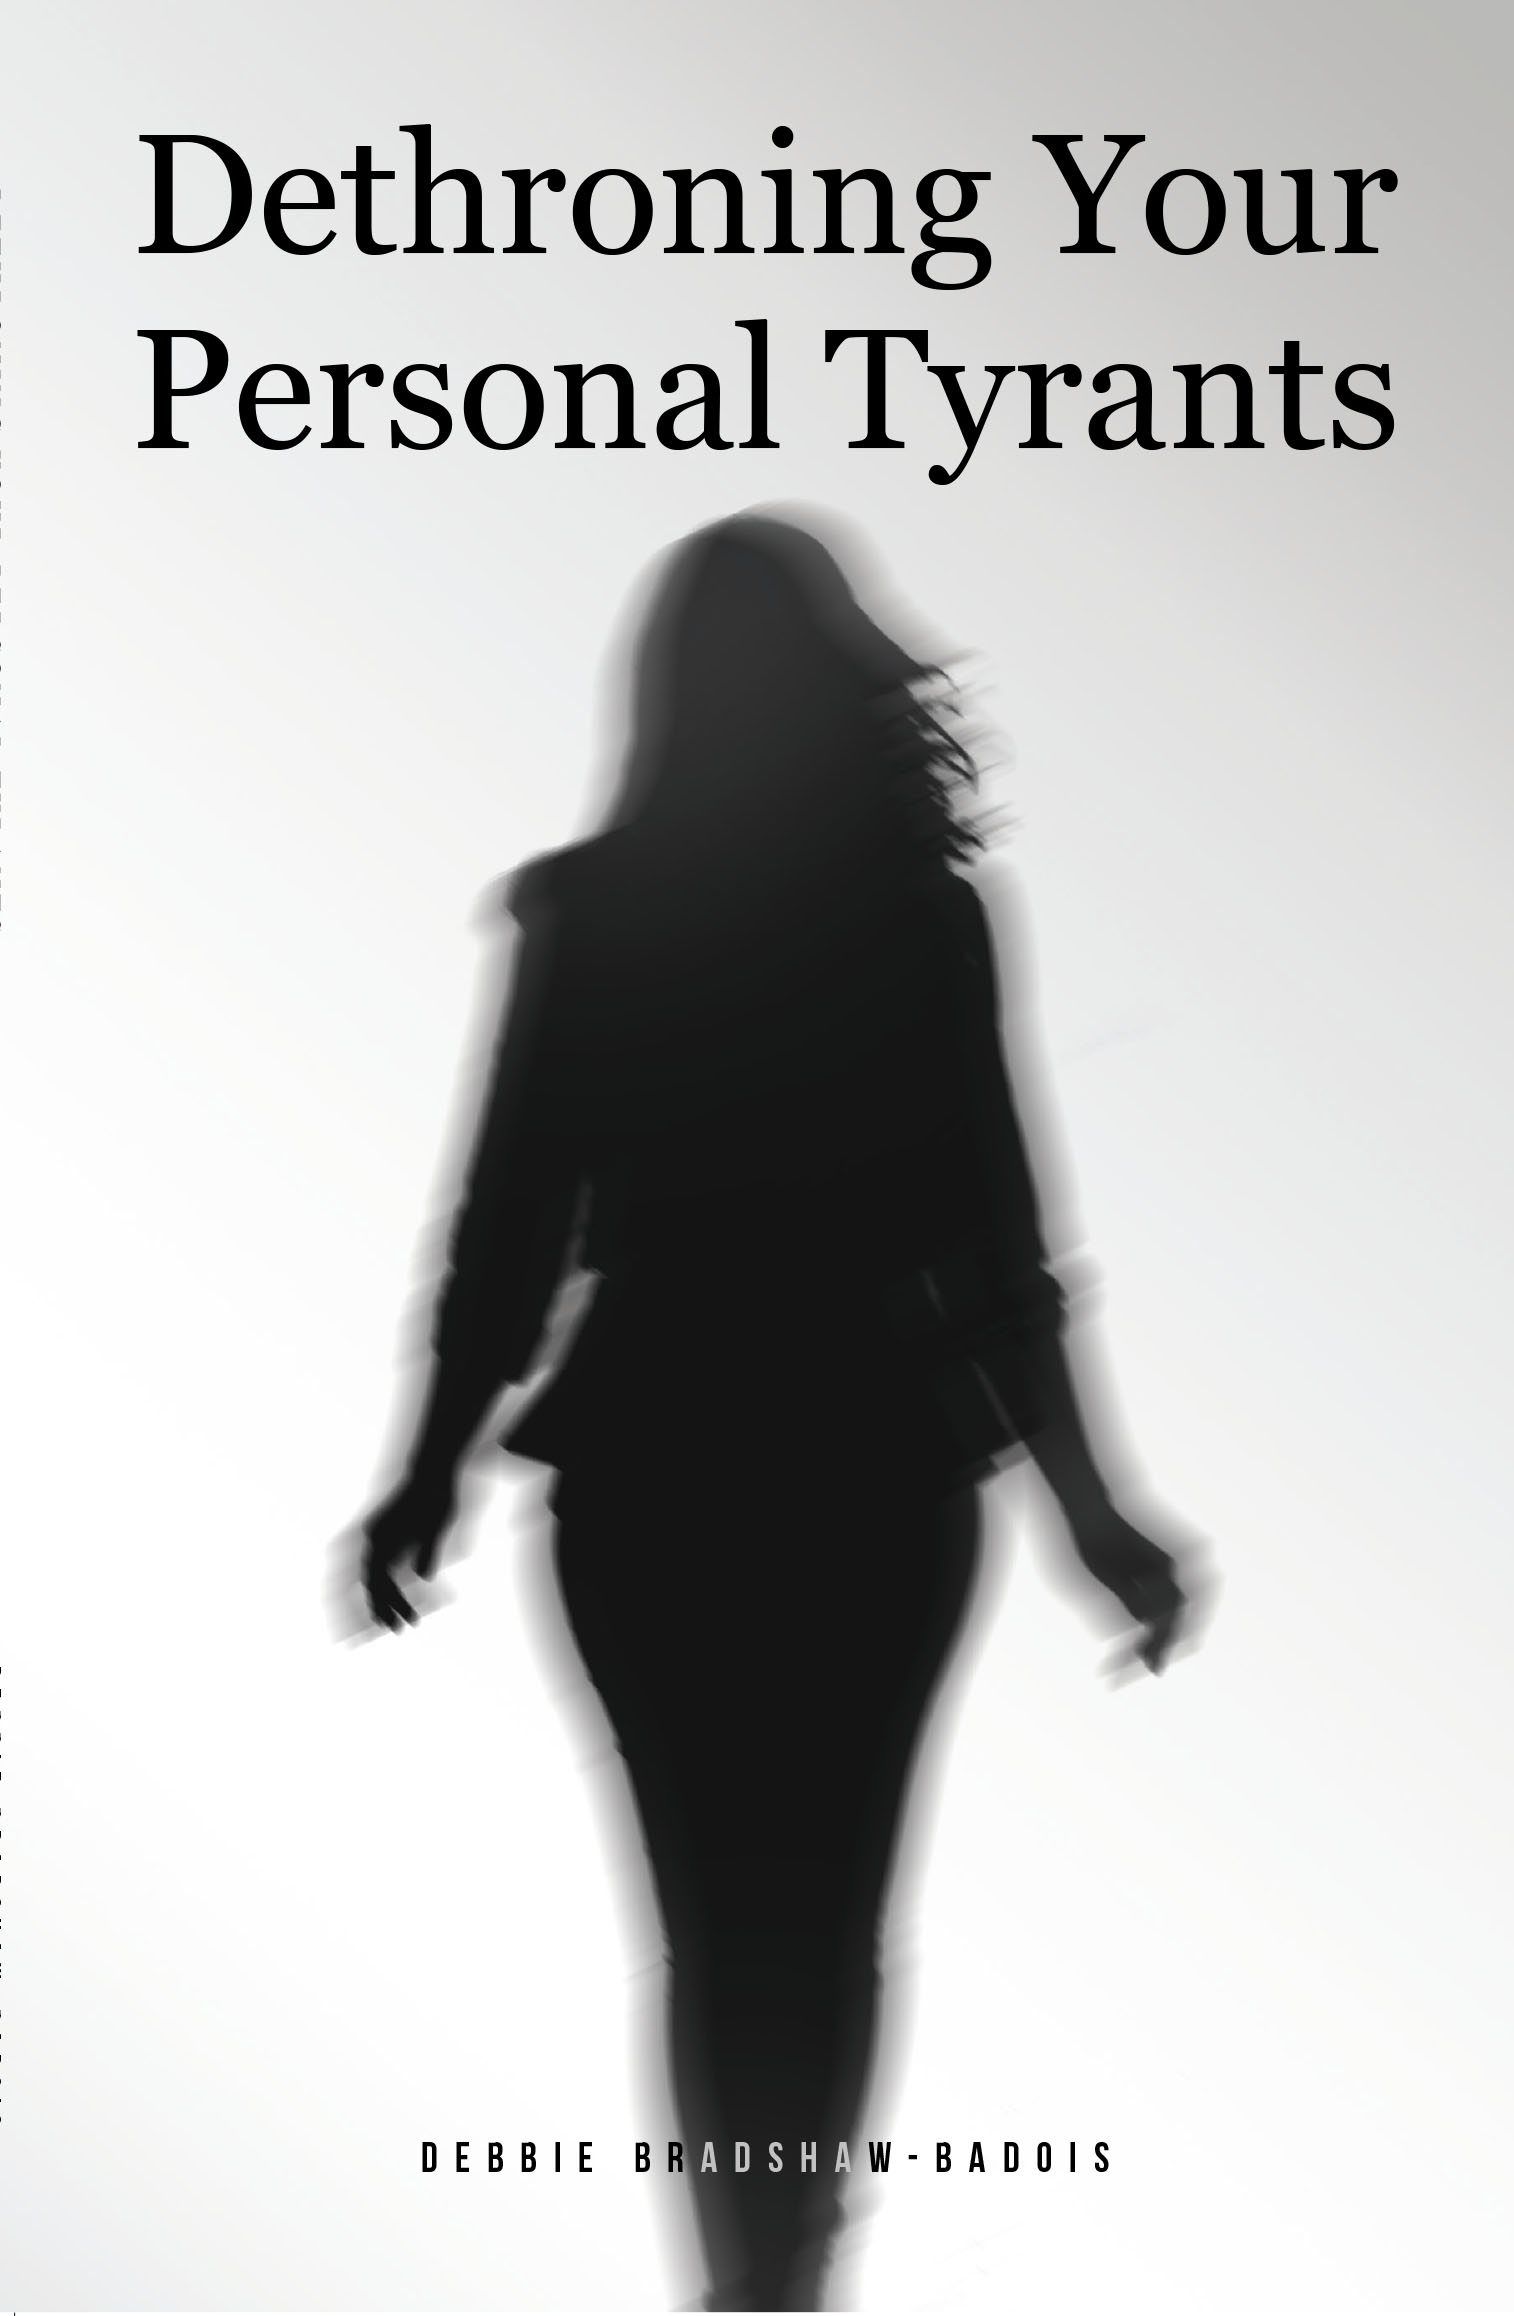 Debbie Bradshaw-Badois’s New Book, “Dethroning Your Personal Tyrants,” Explores How to Deal with the Obstacles Preventing One from Living Their Best Life Possible